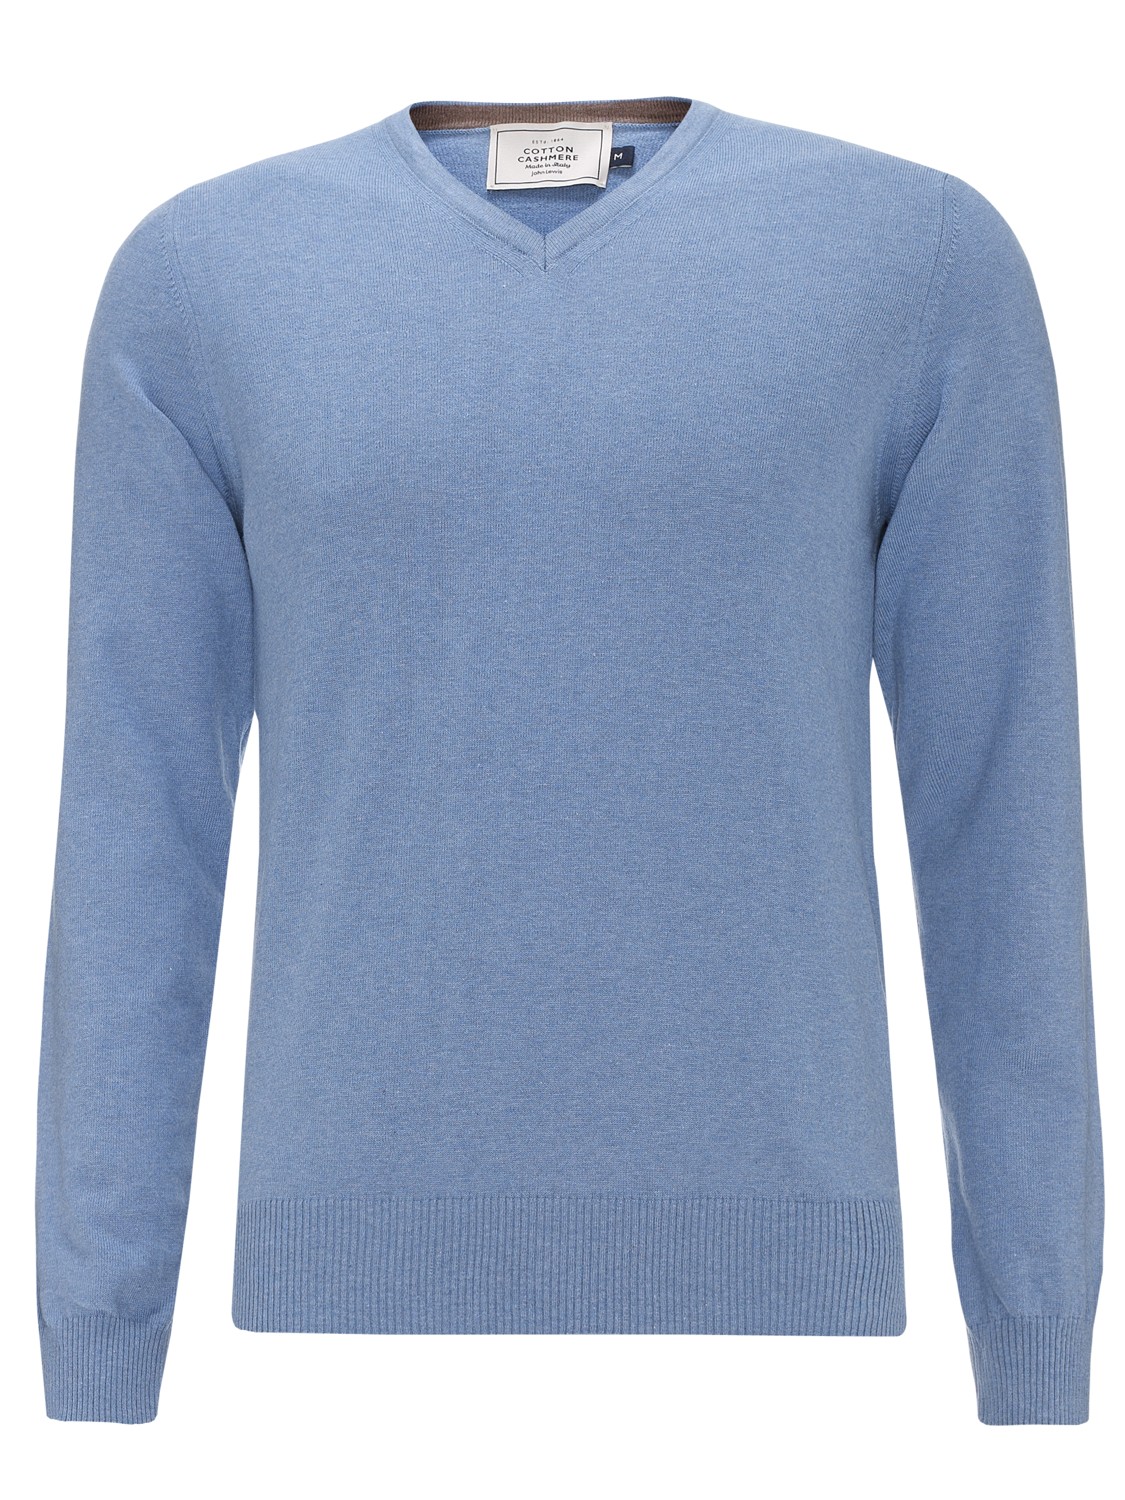 John Lewis Made in Italy Cotton Cashmere Vneck Jumper in Light Blue ...